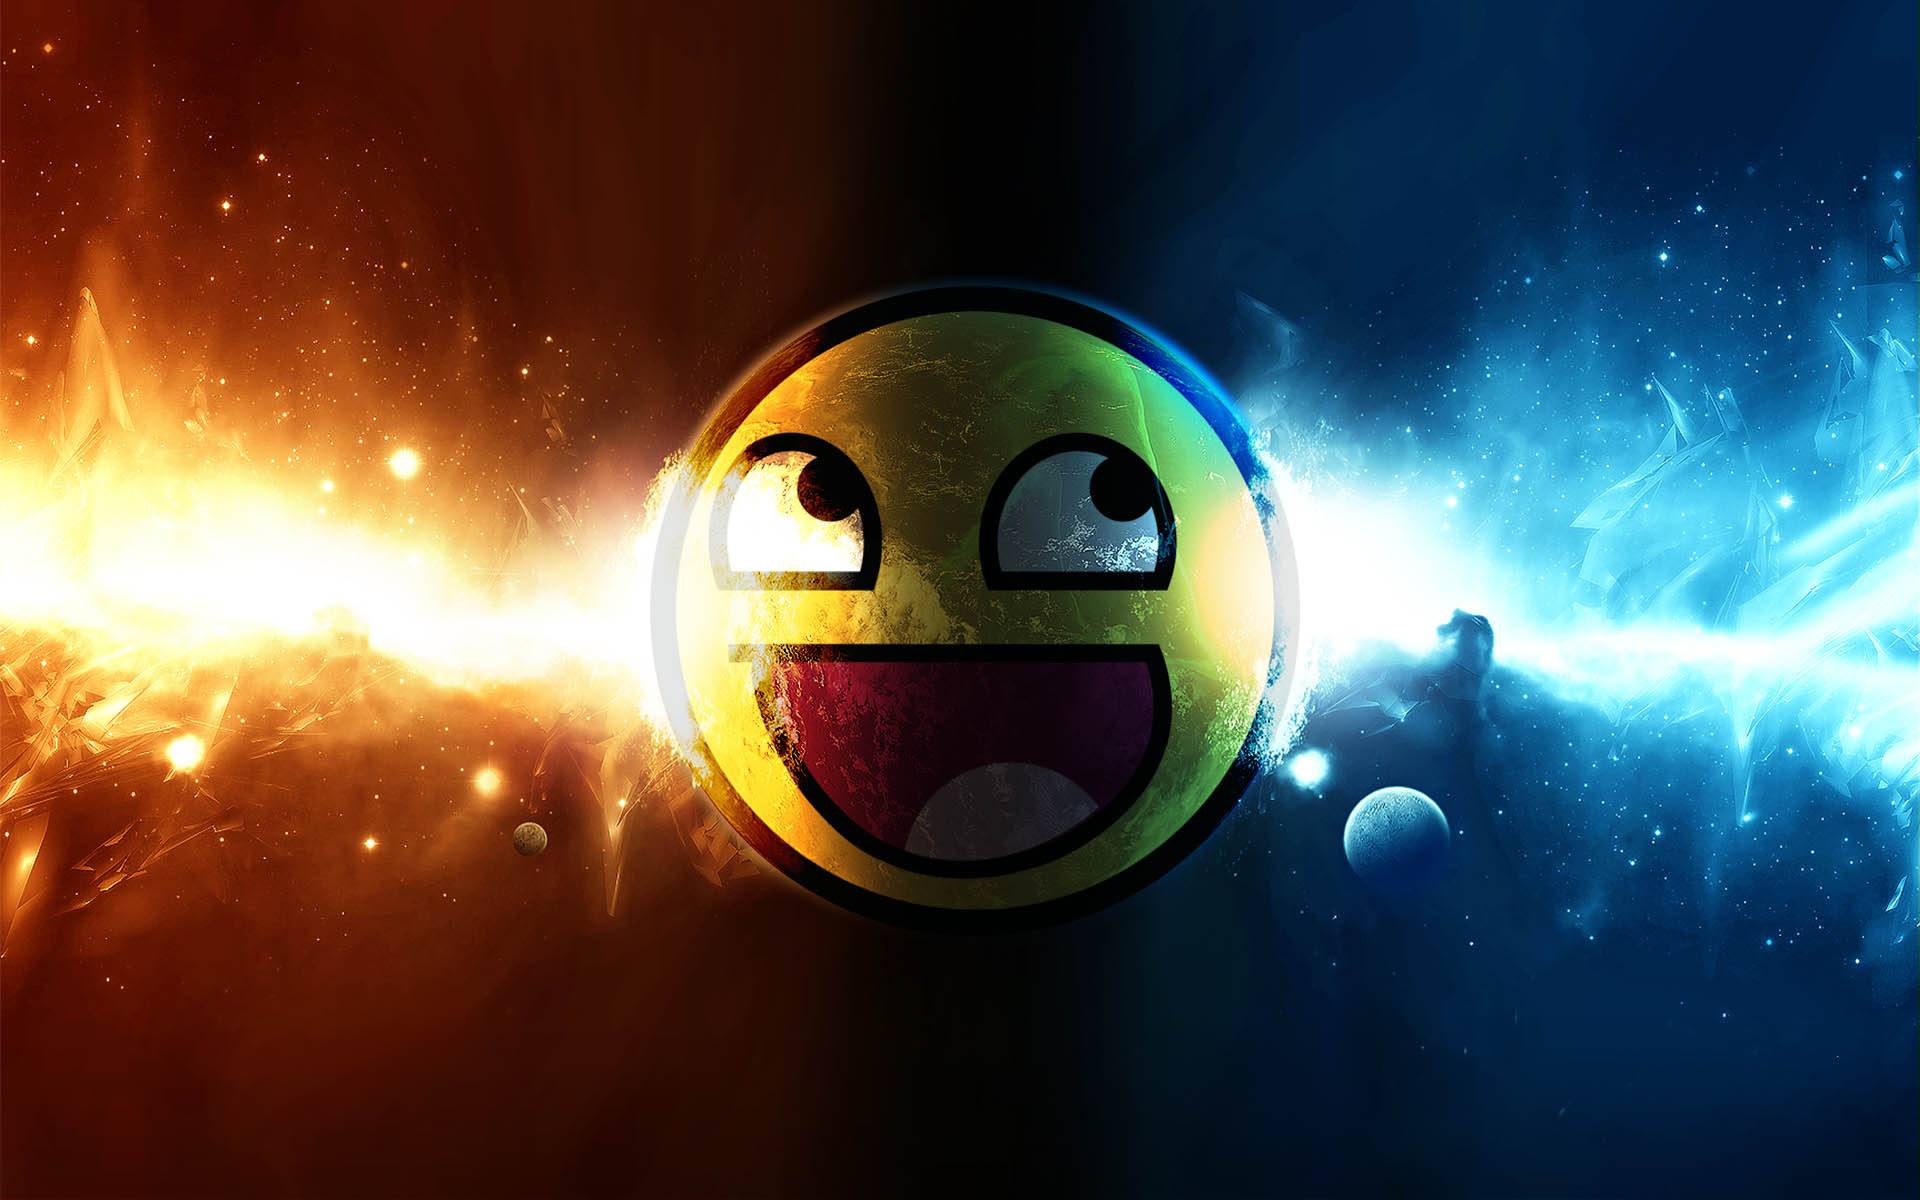 Awesome Smiley Background 2225 Hd Wallpapers in Others   Imagescicom 1920x1200